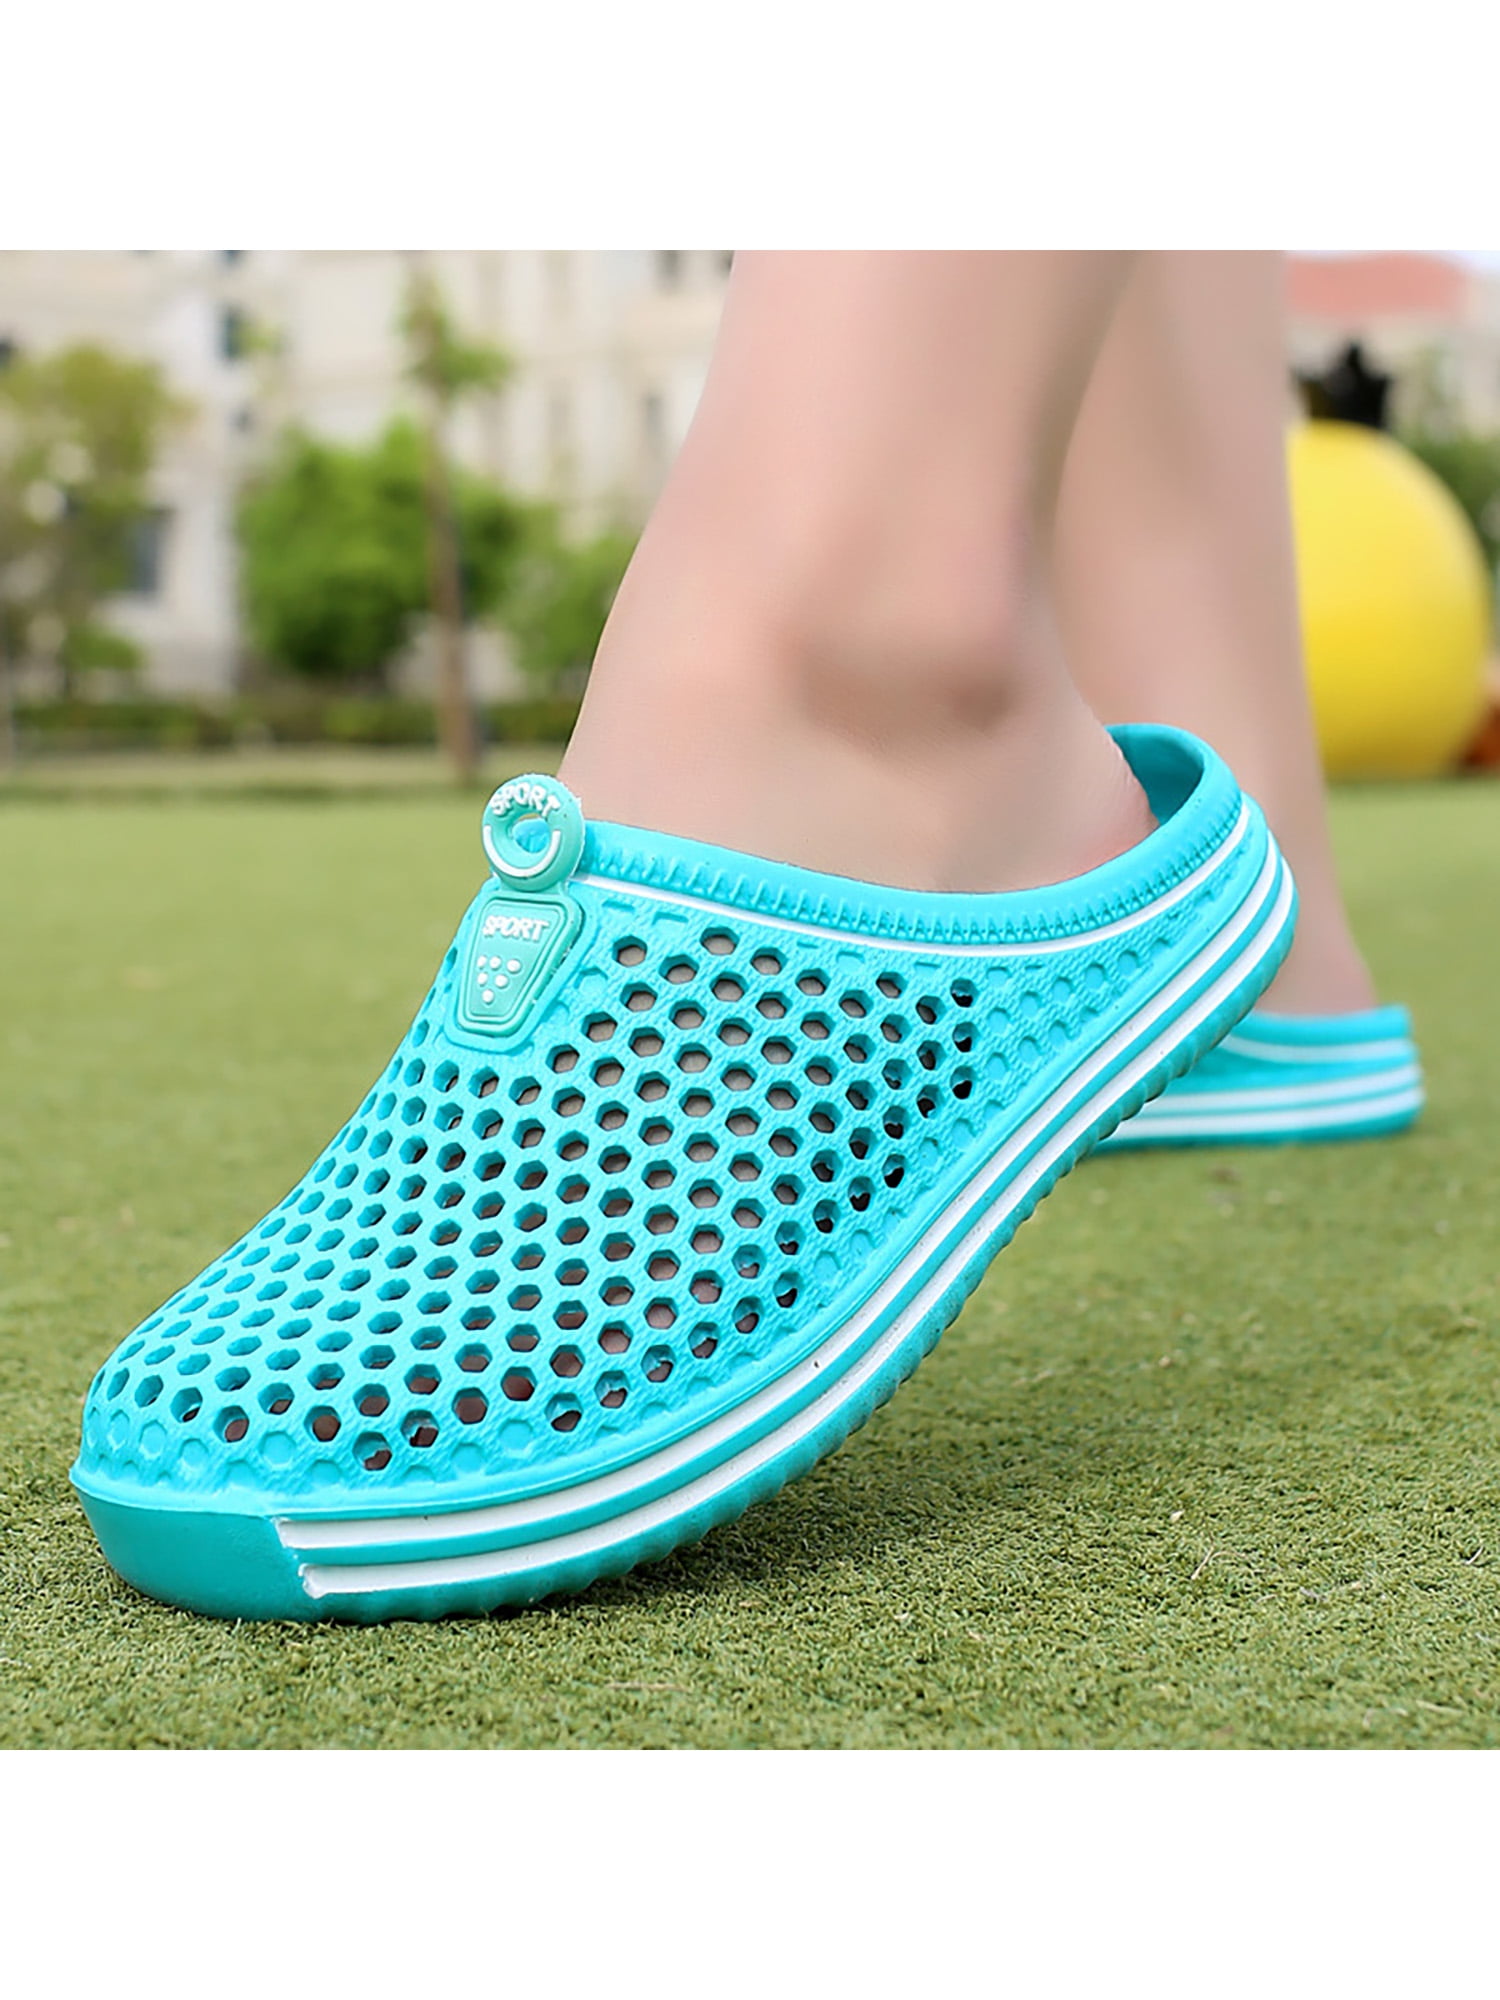 Women's Men's Trainers Sandals Mules Men's Clogs Comfortable Non-Slip Garden Shoes Slippers Lightweight Breathable Walking Shoes Slippers Casual Shoes for Unisex Soft Leisure 